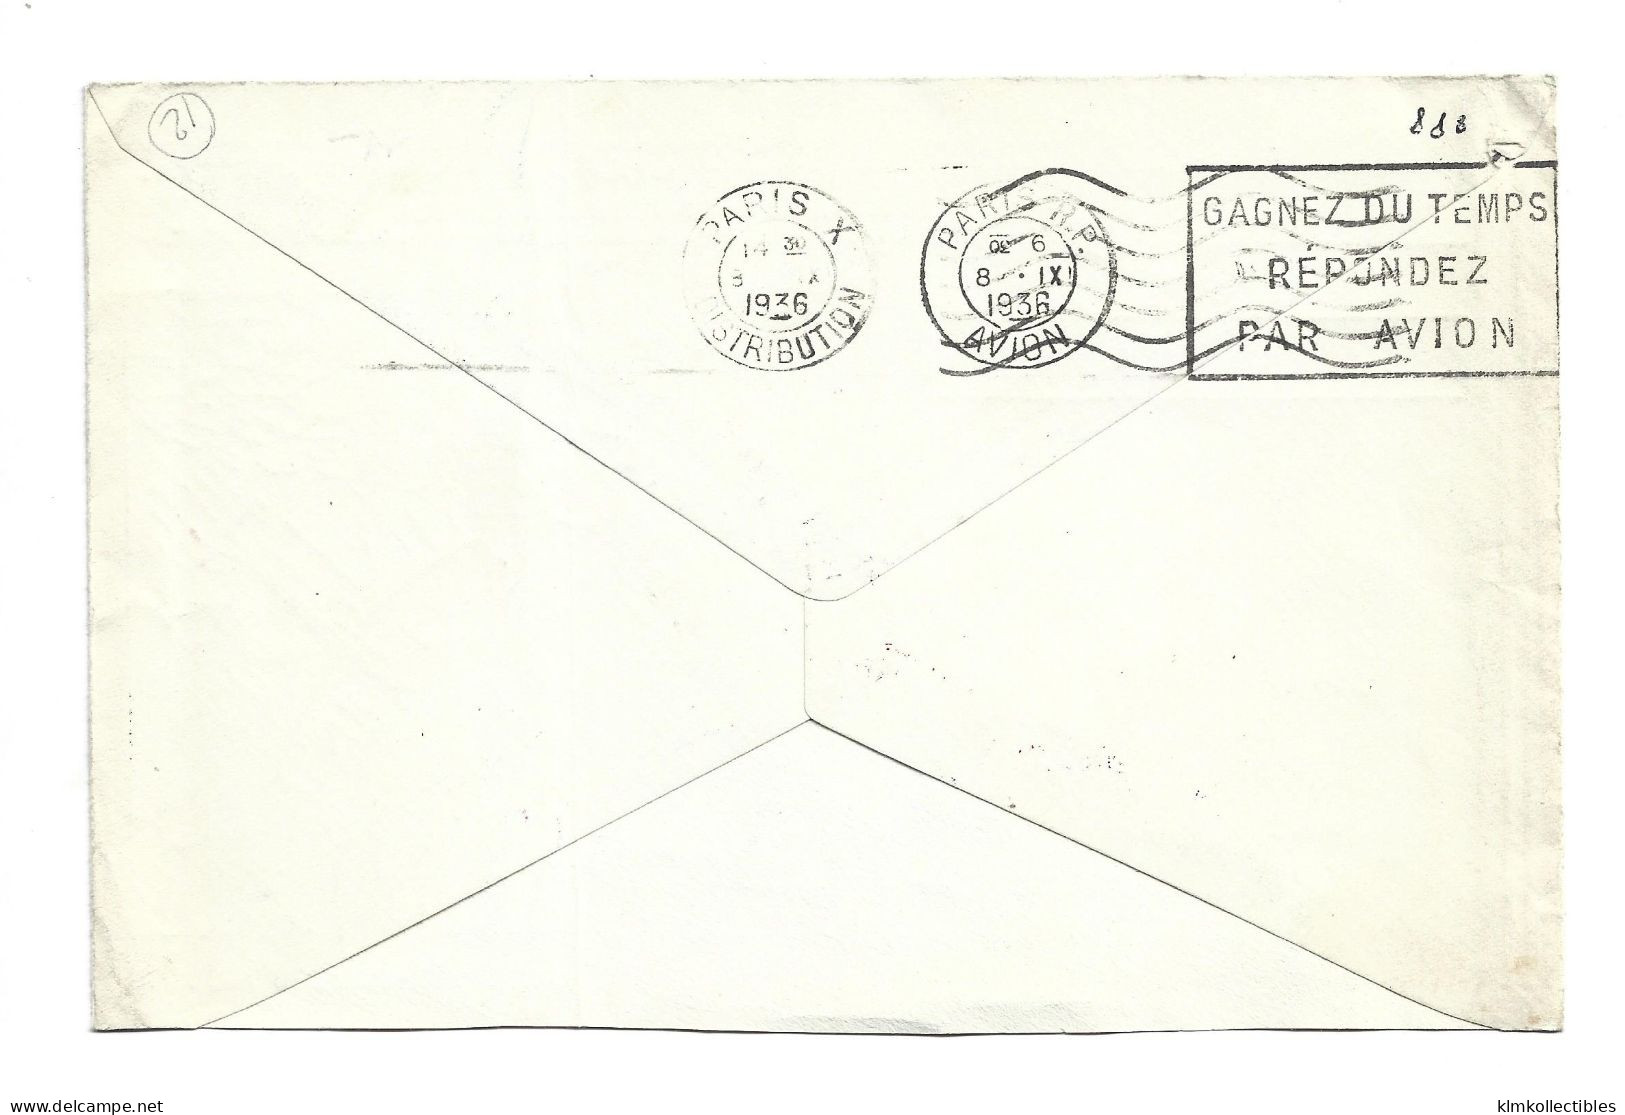 DENMARK DANMARK - AIRMAIL LUFTPOST COVER TO FRANCE - 1936 NEPA SPECIAL CANCEL FIRST 1ST FLIGHT - Airmail